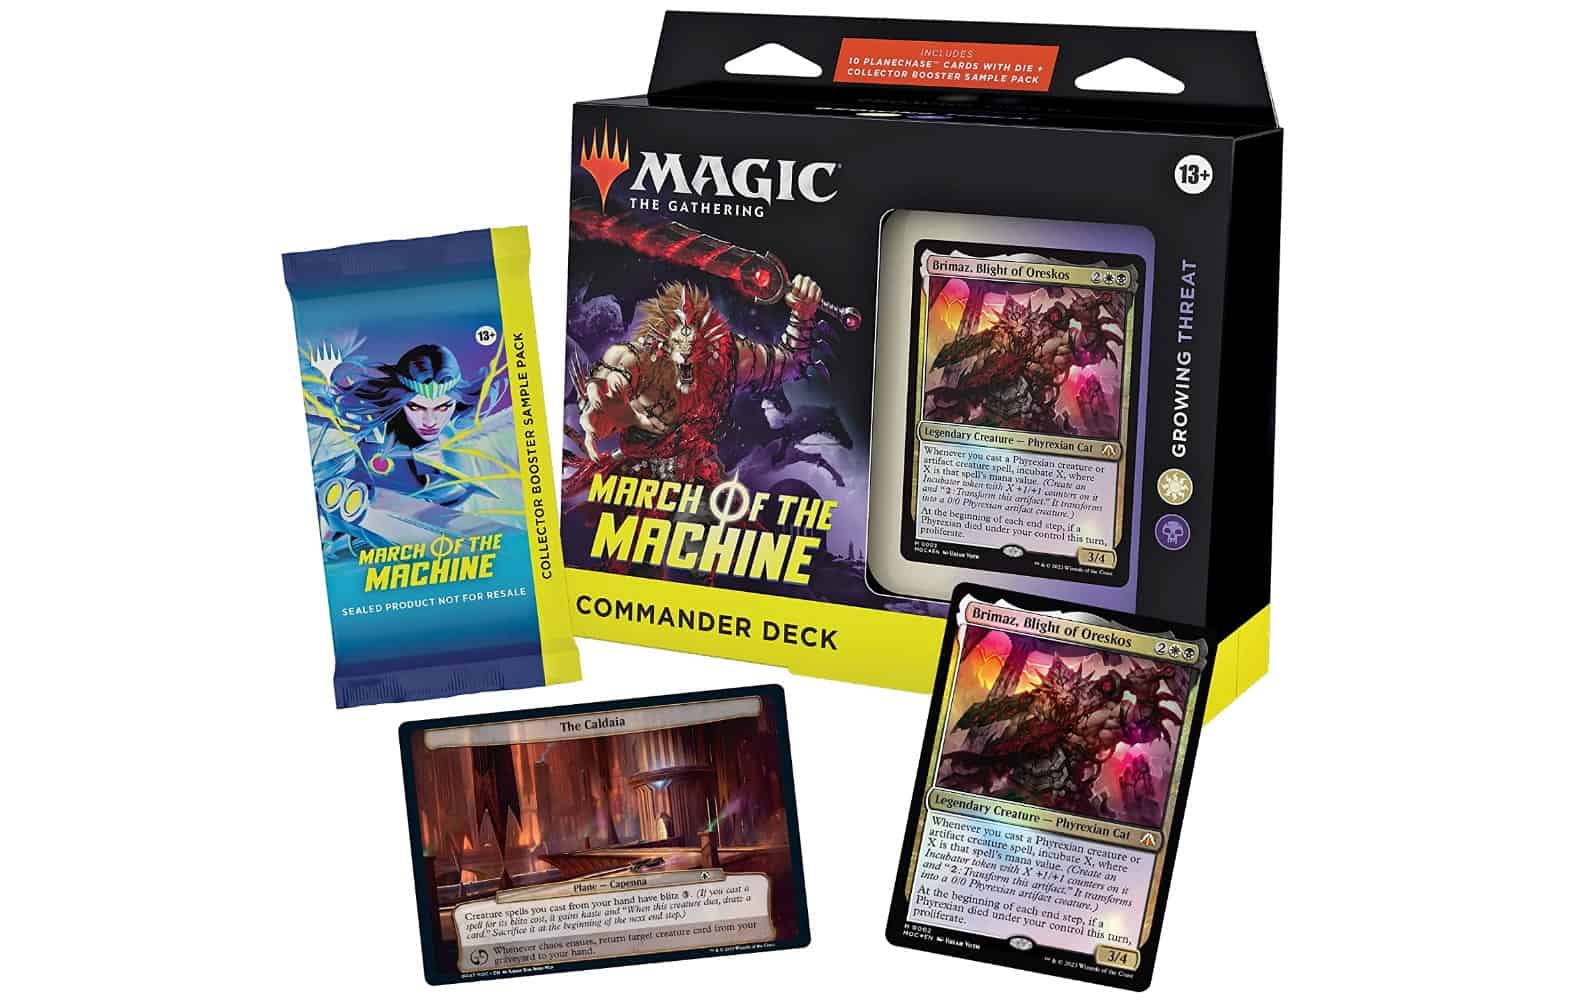 Picture of the Growing Threat Commander Preconstructed deck